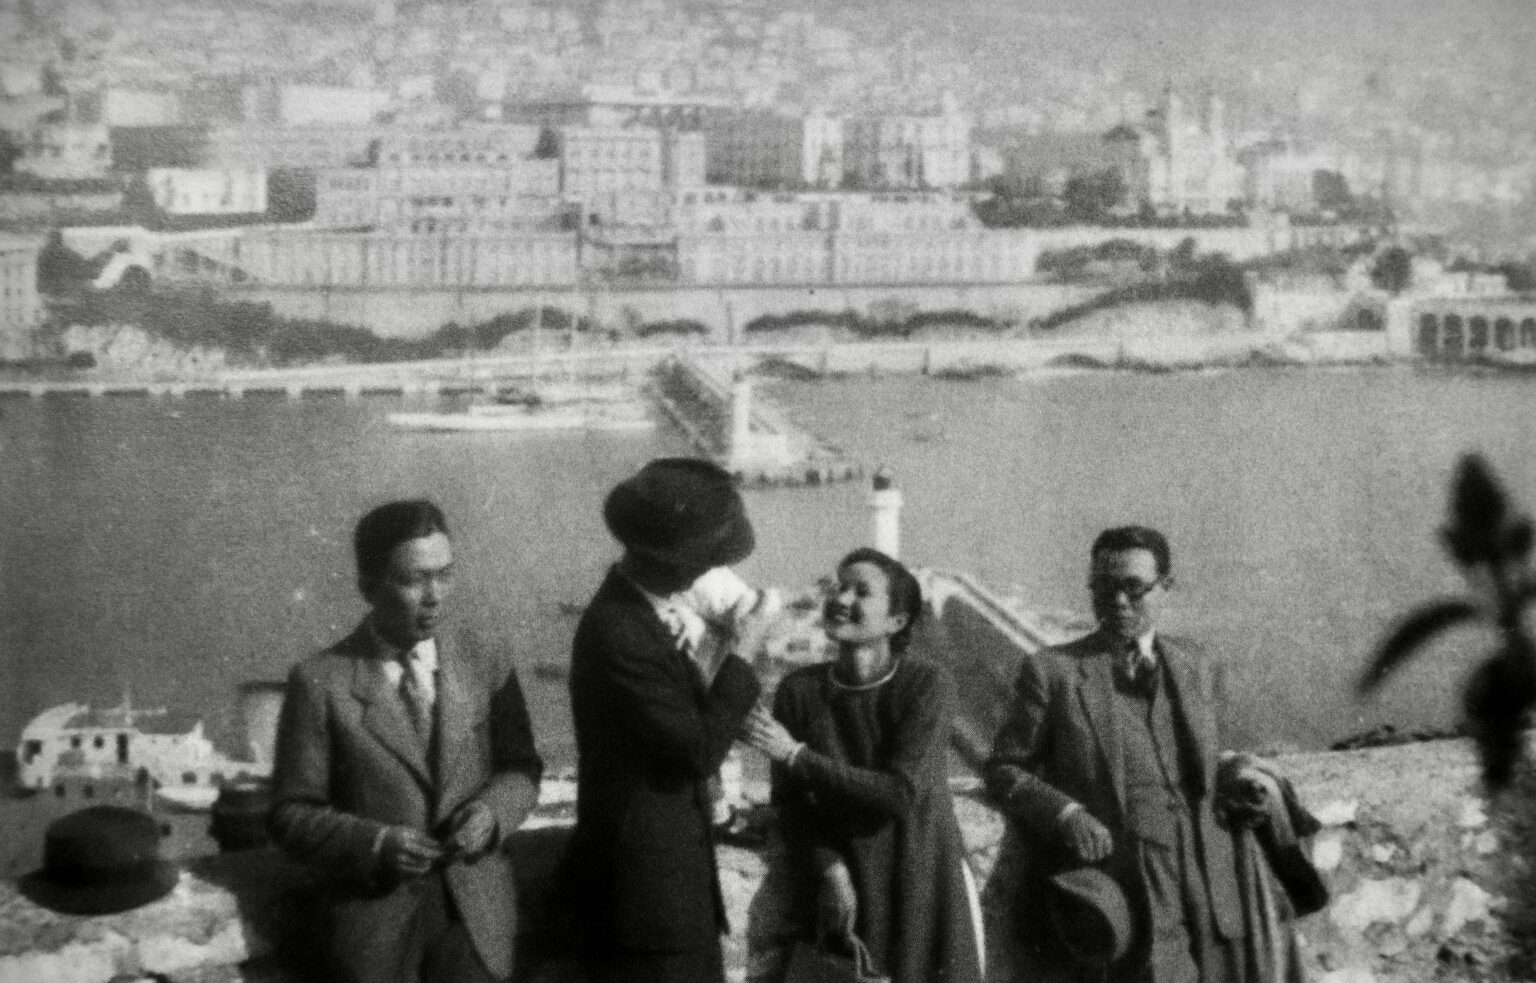 Mai Trung Thu, Le Thi Luu (with her husband and baby to her left) and Le Pho in Monaco in 1942